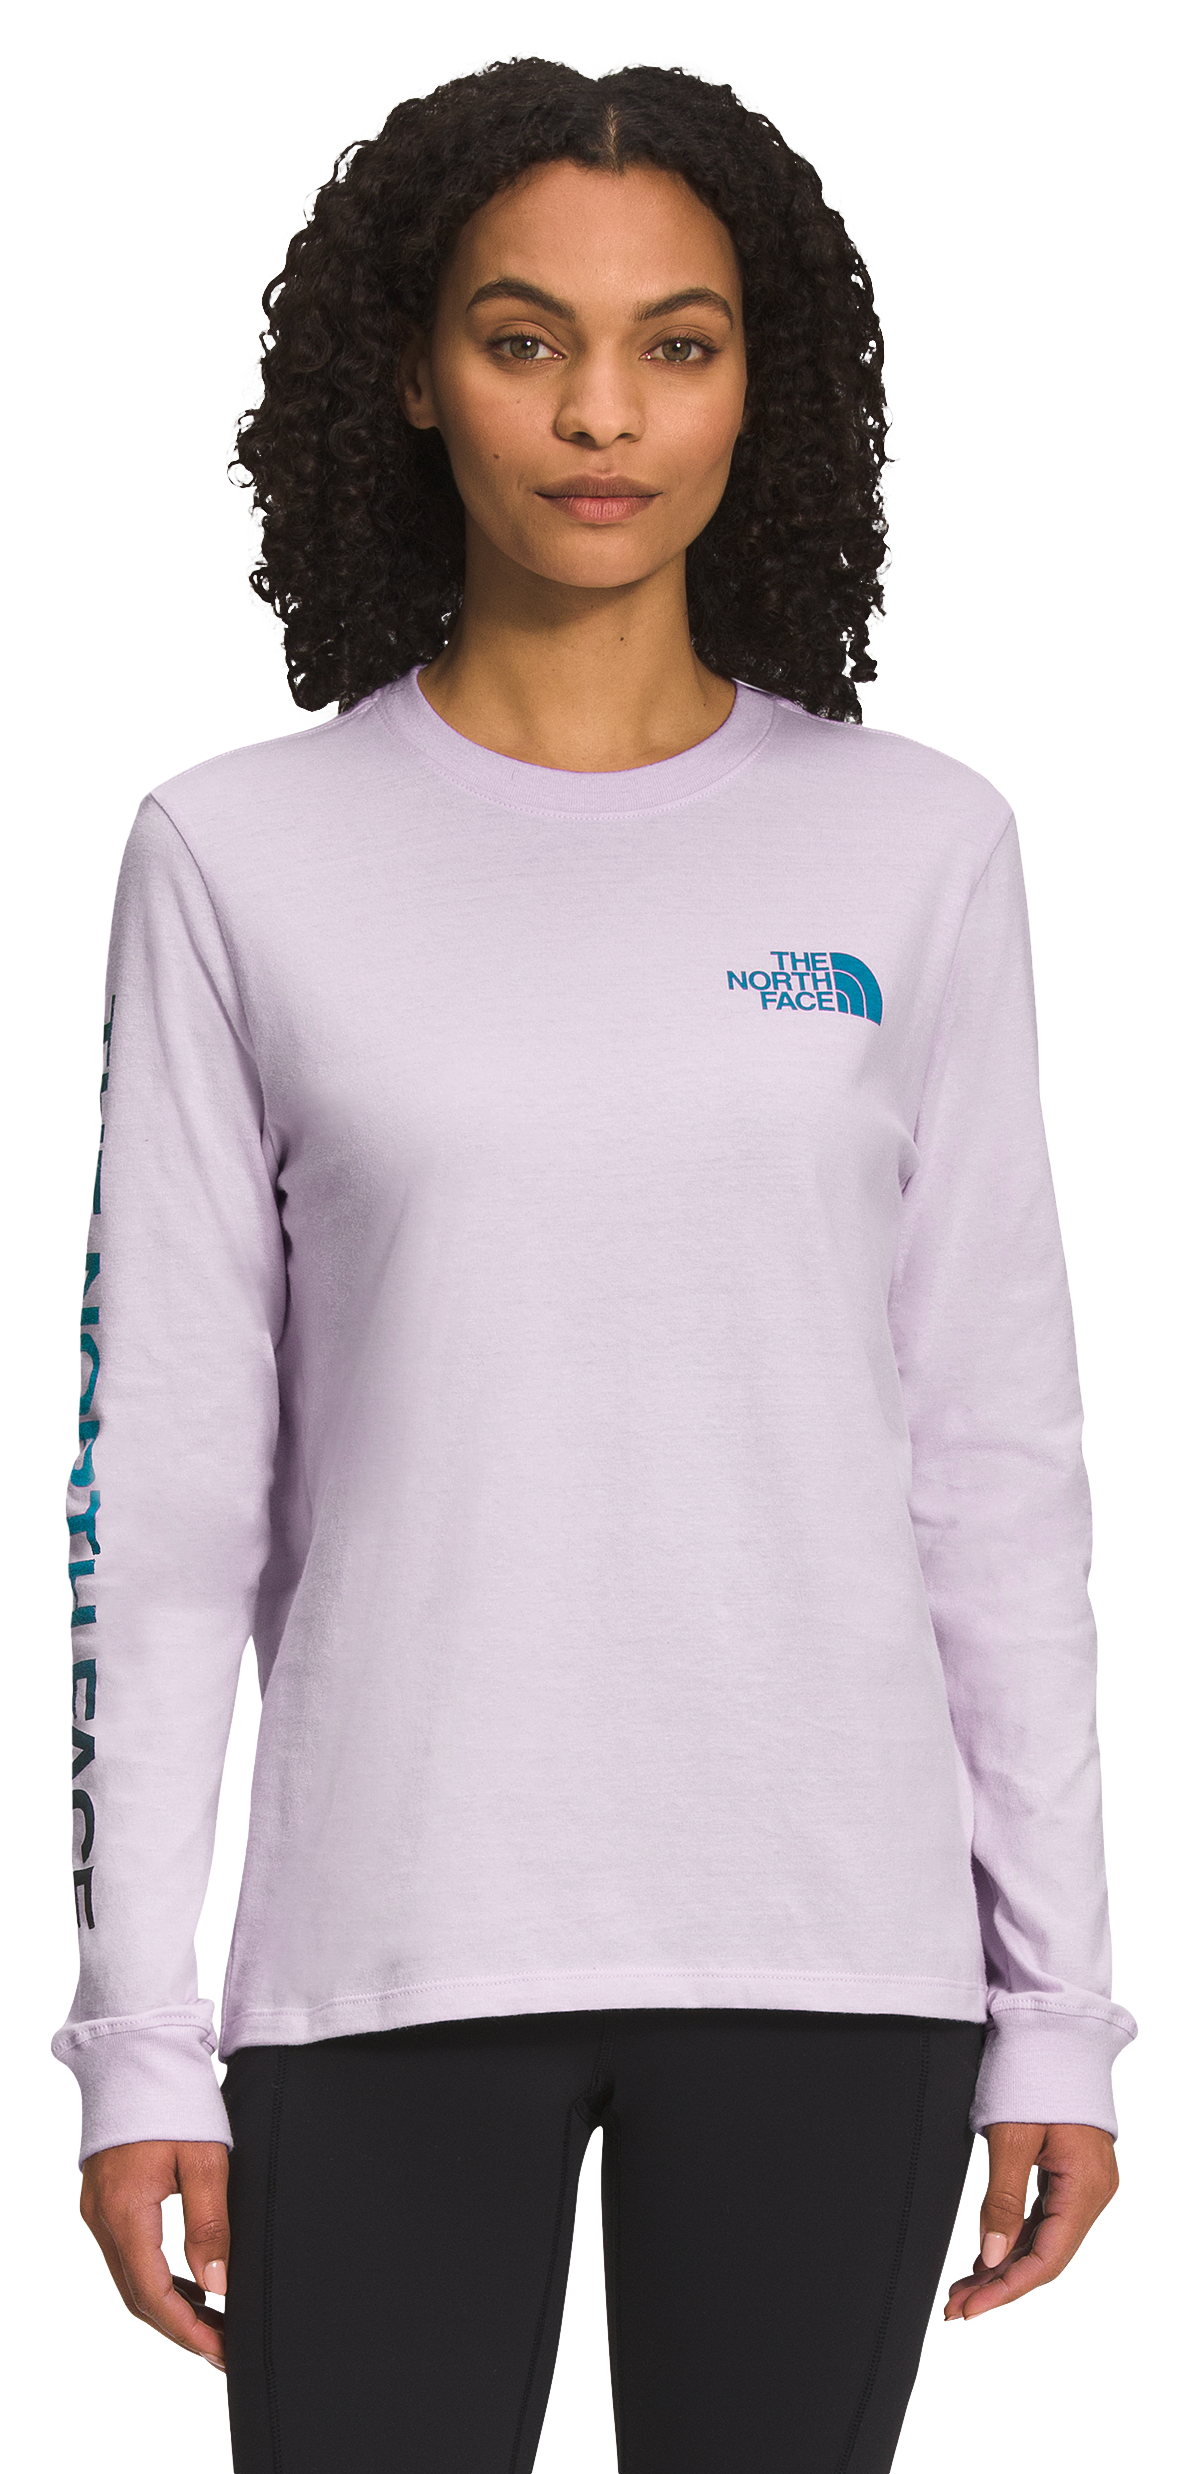 The North Face Brand Proud Long-Sleeve Shirt for Ladies - Lavender Fog/Ombre Graphic - XXL